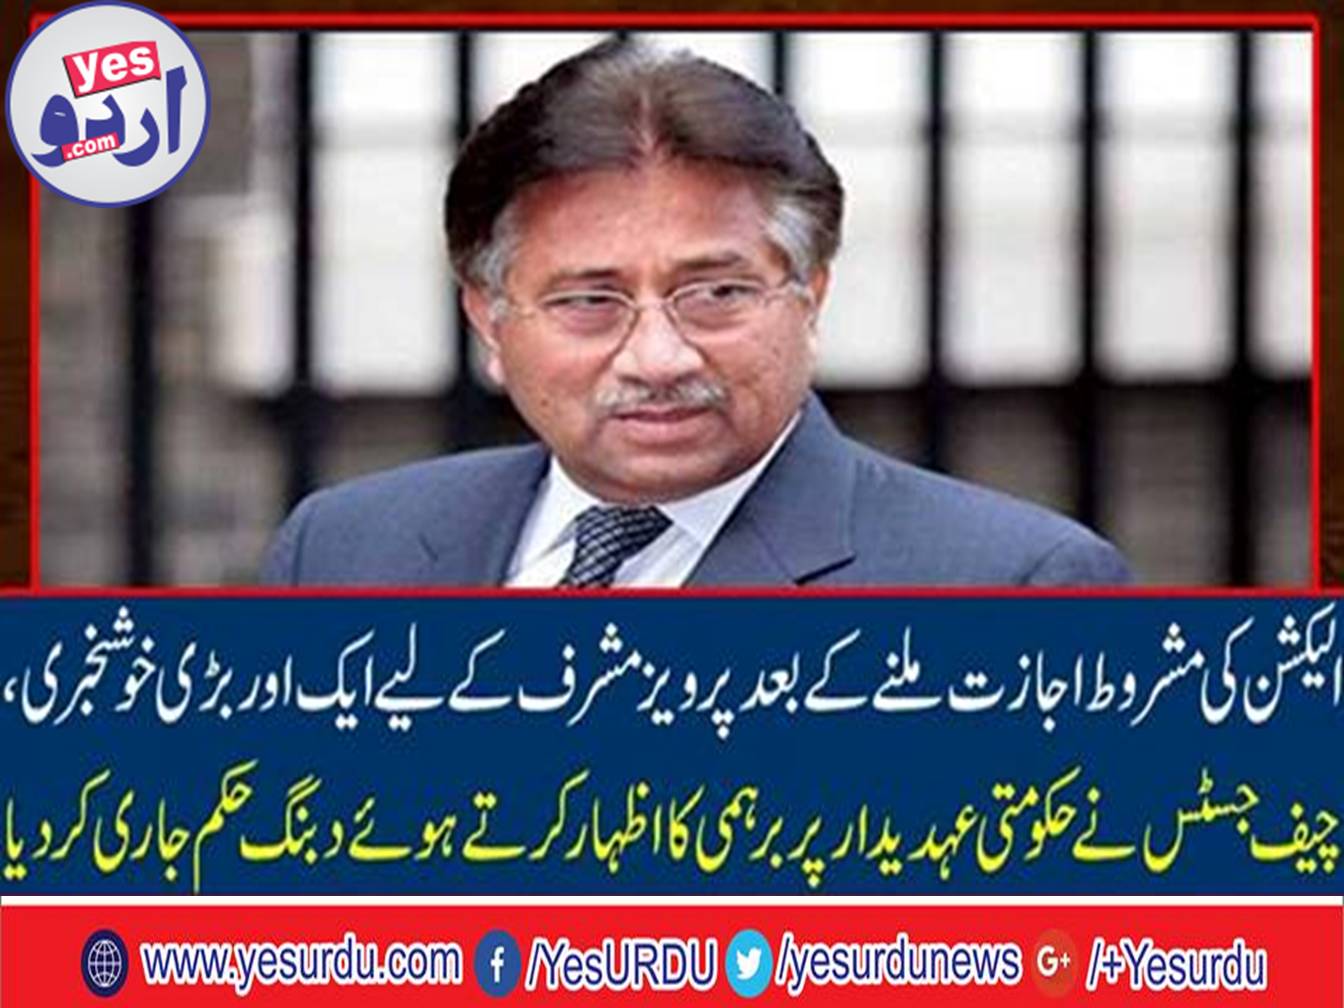 After getting a legitimate permission of the election, another big good news for Pervez Musharraf